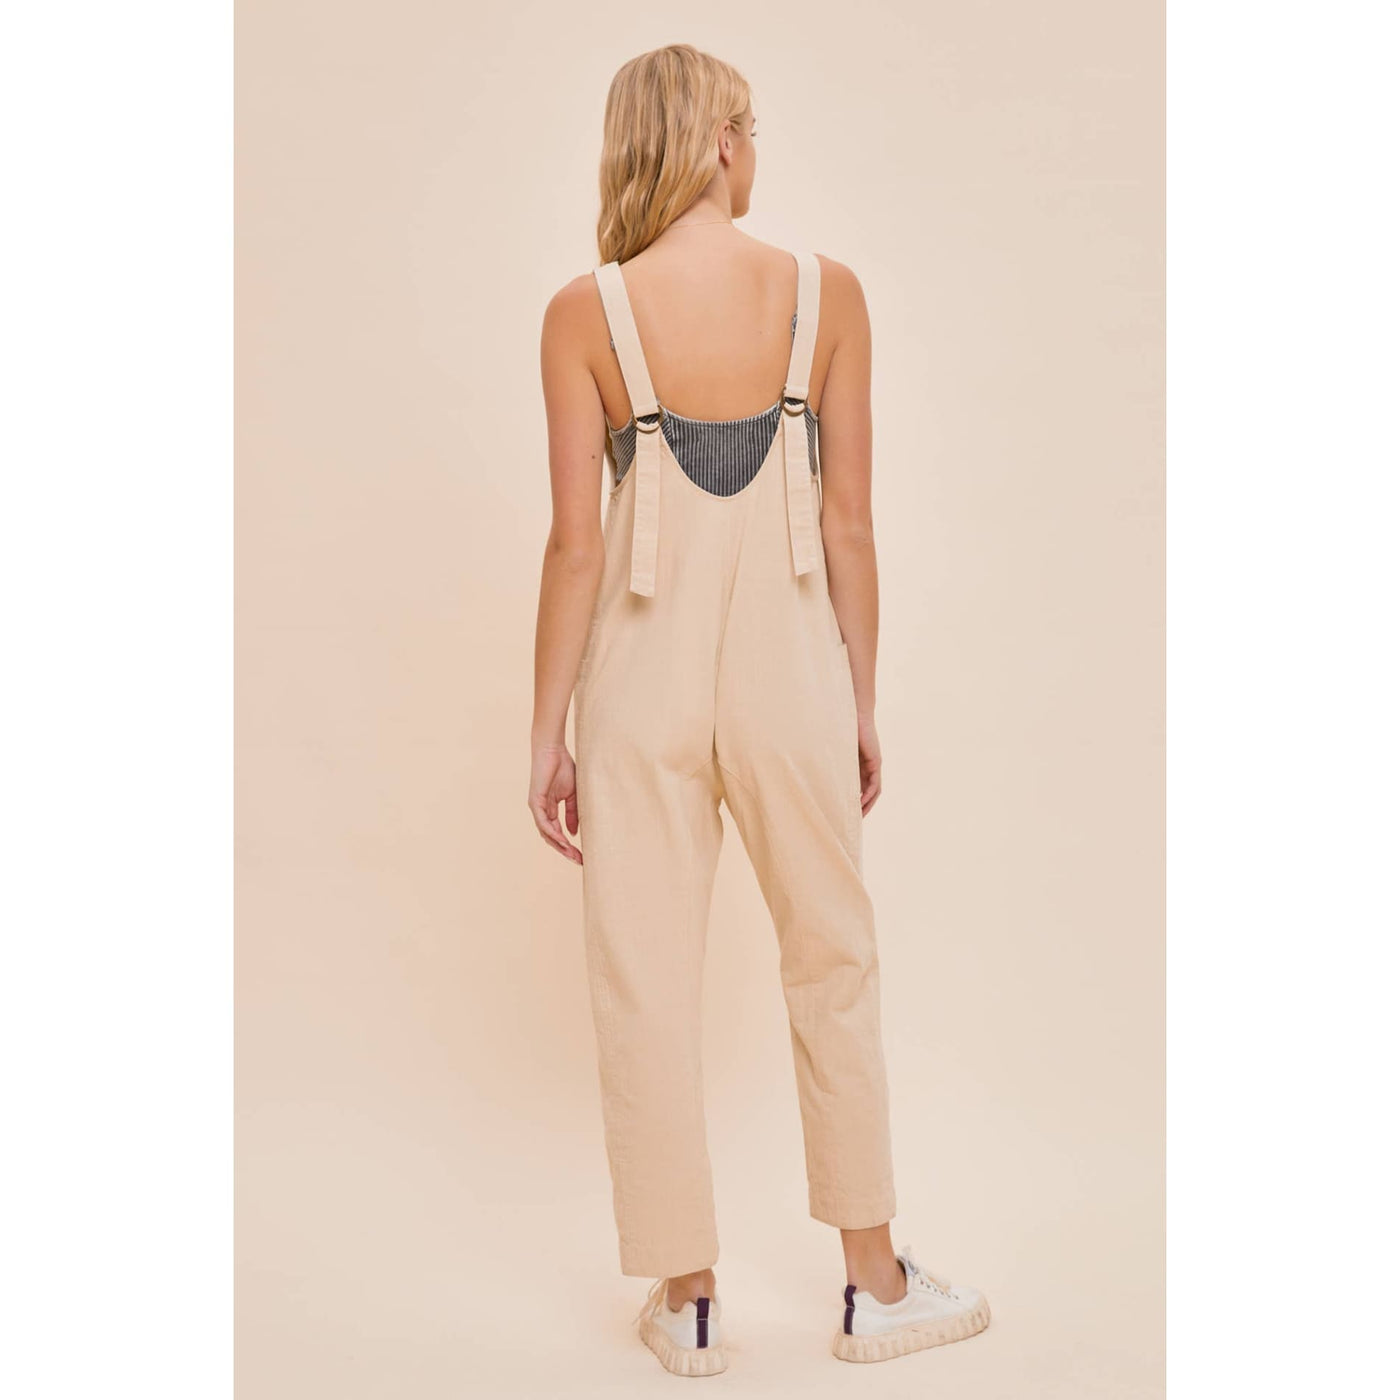 On The Road Jumpsuit - 170 Casual Dresses/Jumpsuits/Rompers